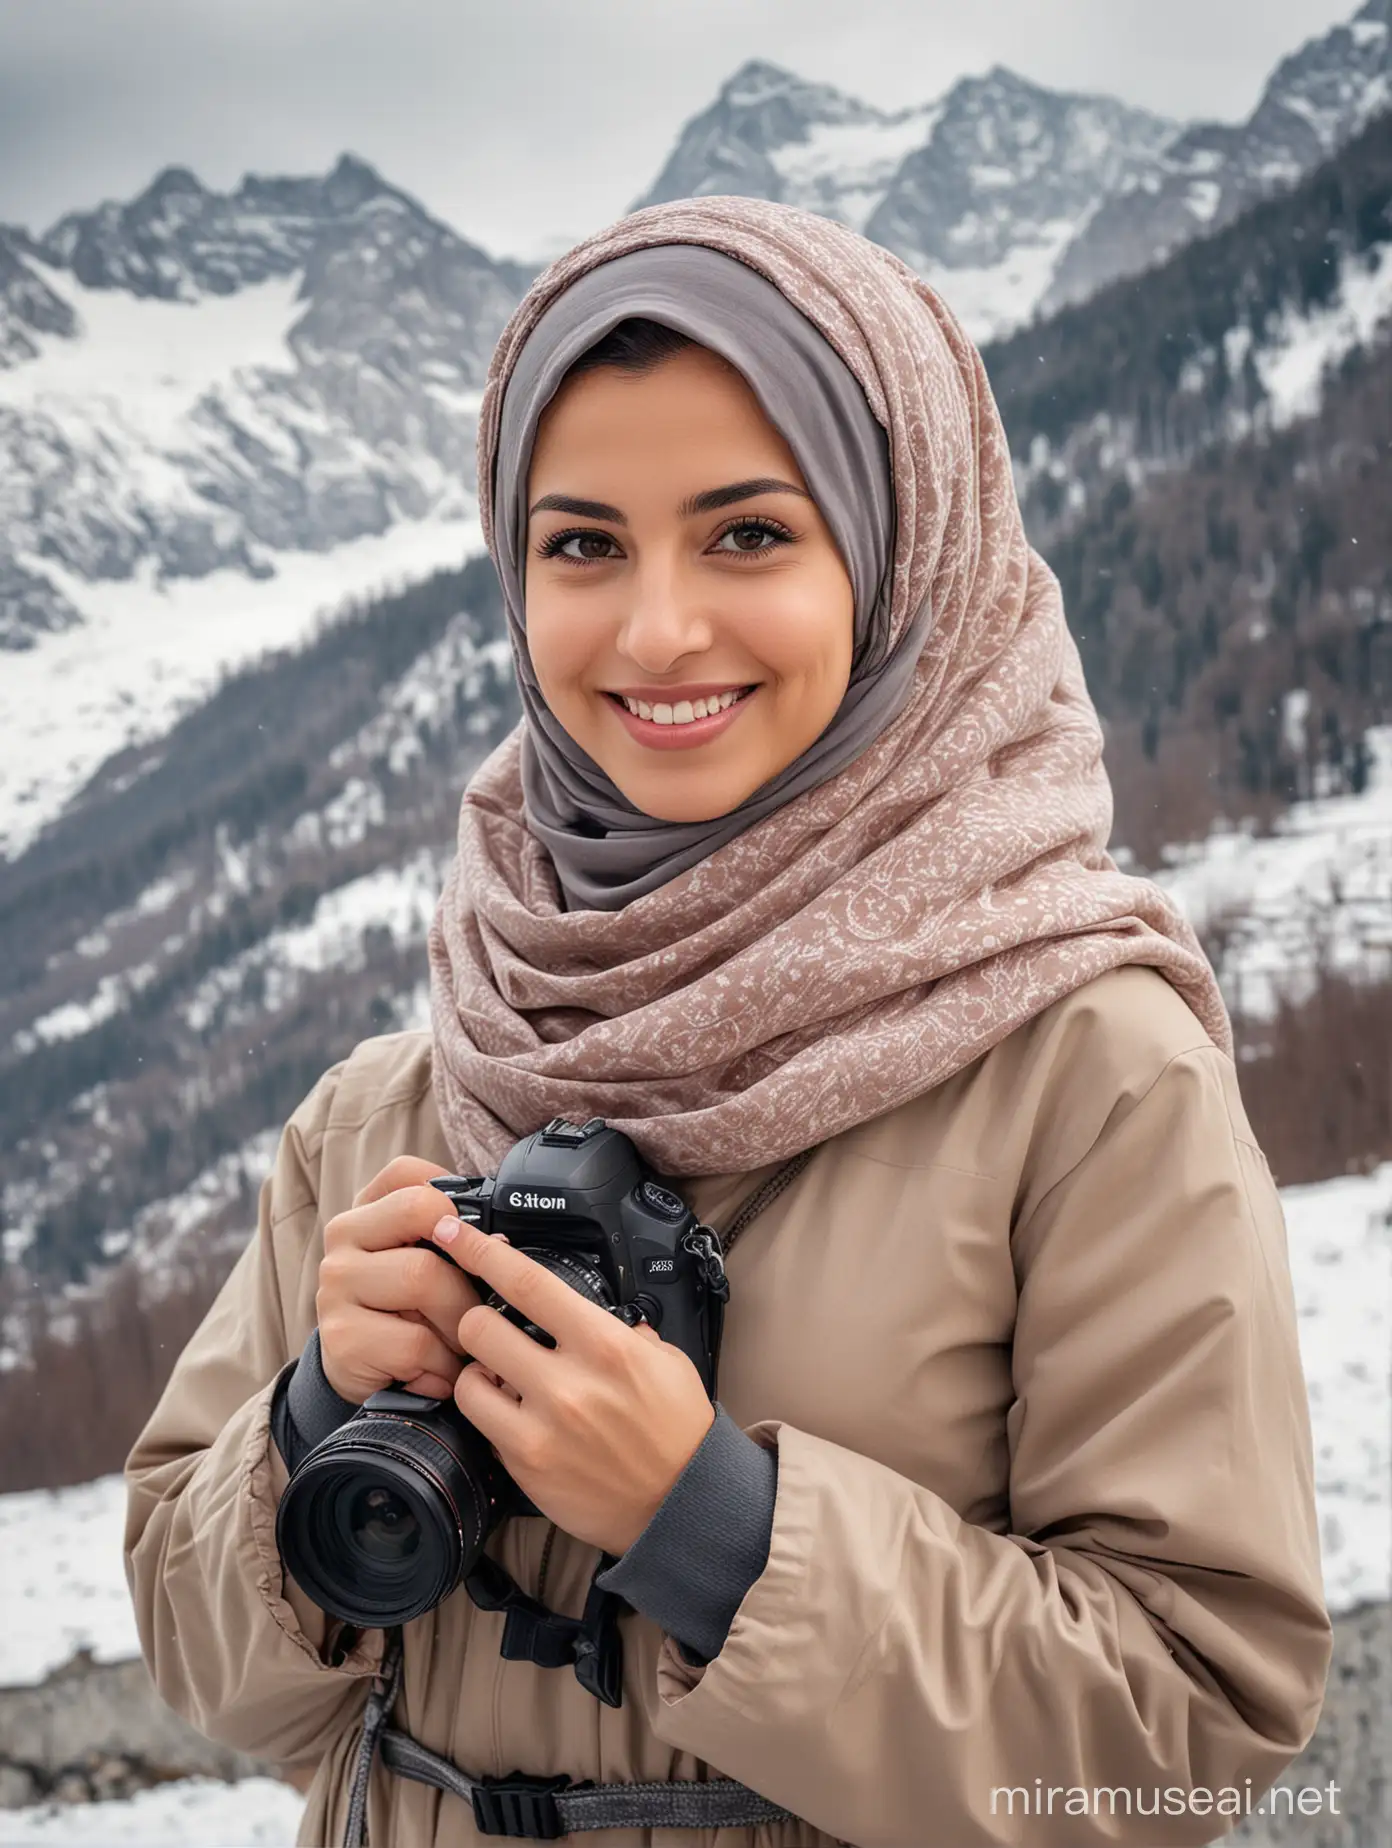 Professional photograph, beautiful woman, 26 year old, wearing jilbab, closed hijab, hair covered by hijab, smile, detailed faces, holding dslr camera, full body, wearing winter jacket and outdoor shoe, adventure, outdoor, background Swiss mountain, Titlis mountain, snow, body facing forward, UHD.